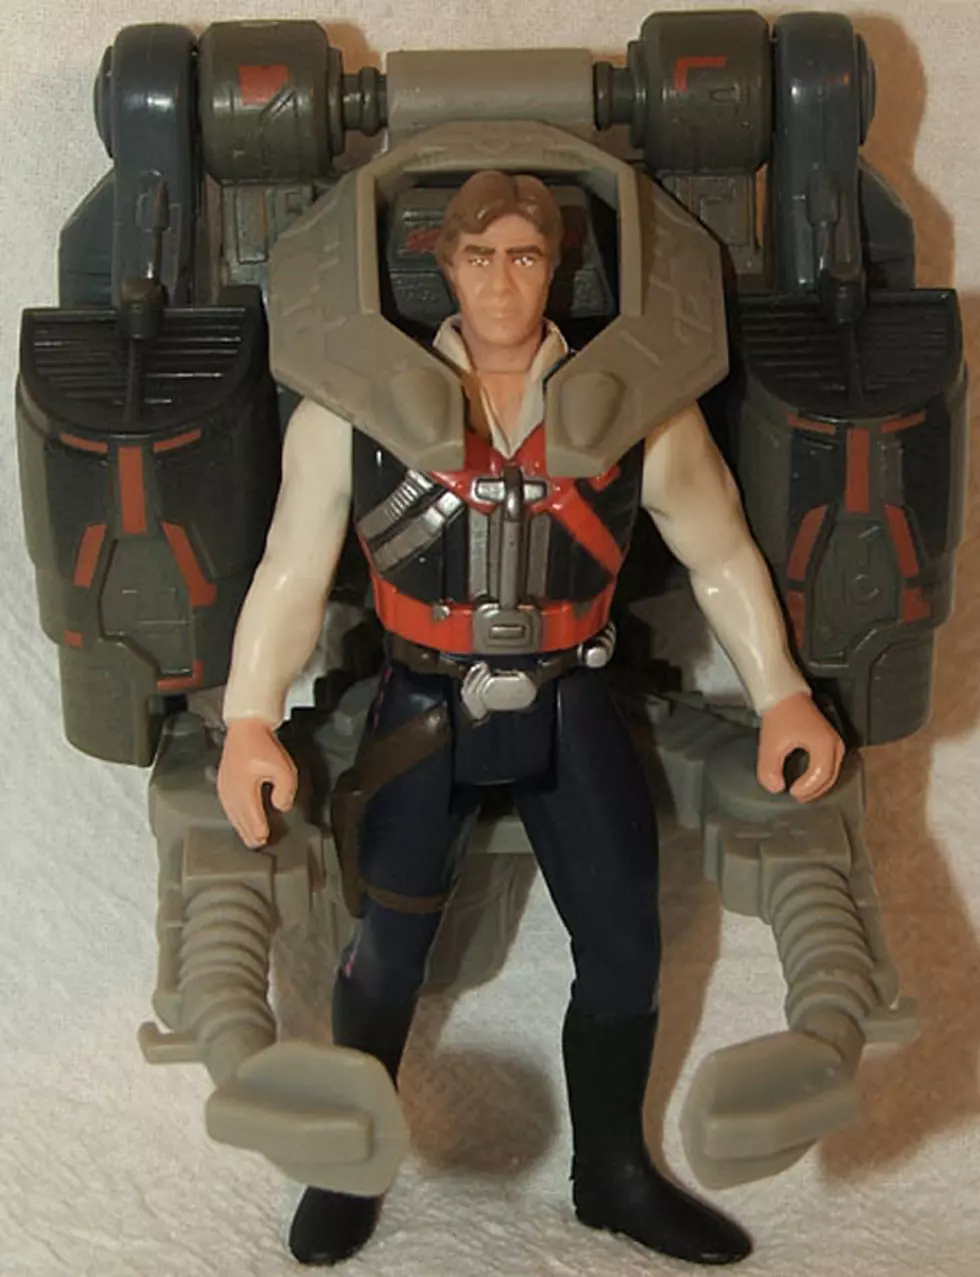 The 10 Dumbest 'Star Wars' Figures Ever Made